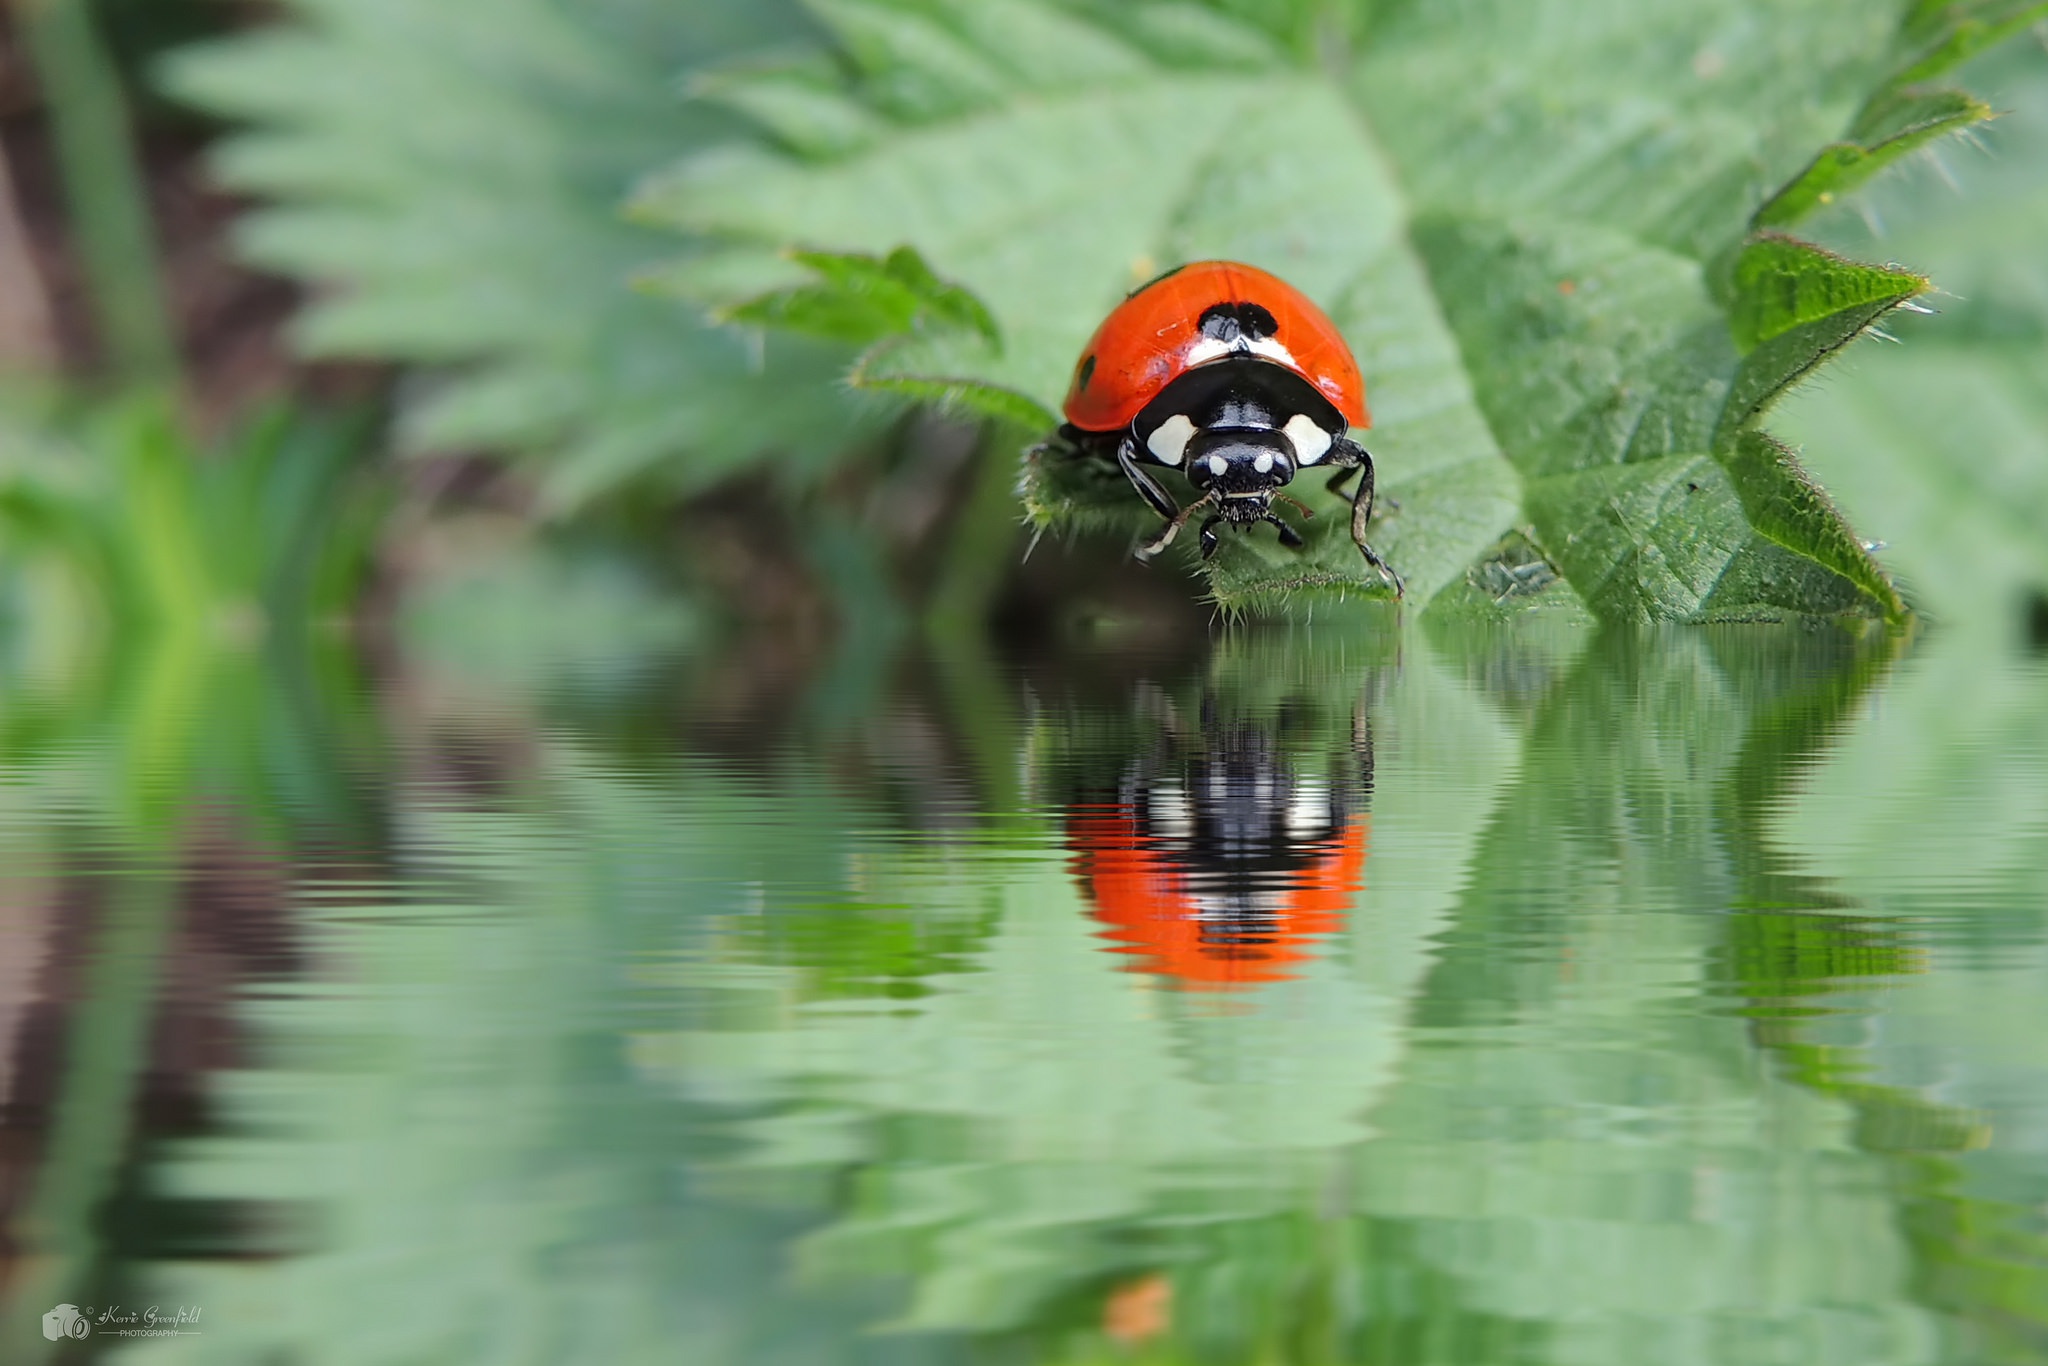 General 2048x1366 ladybugs green animals insect reflection water